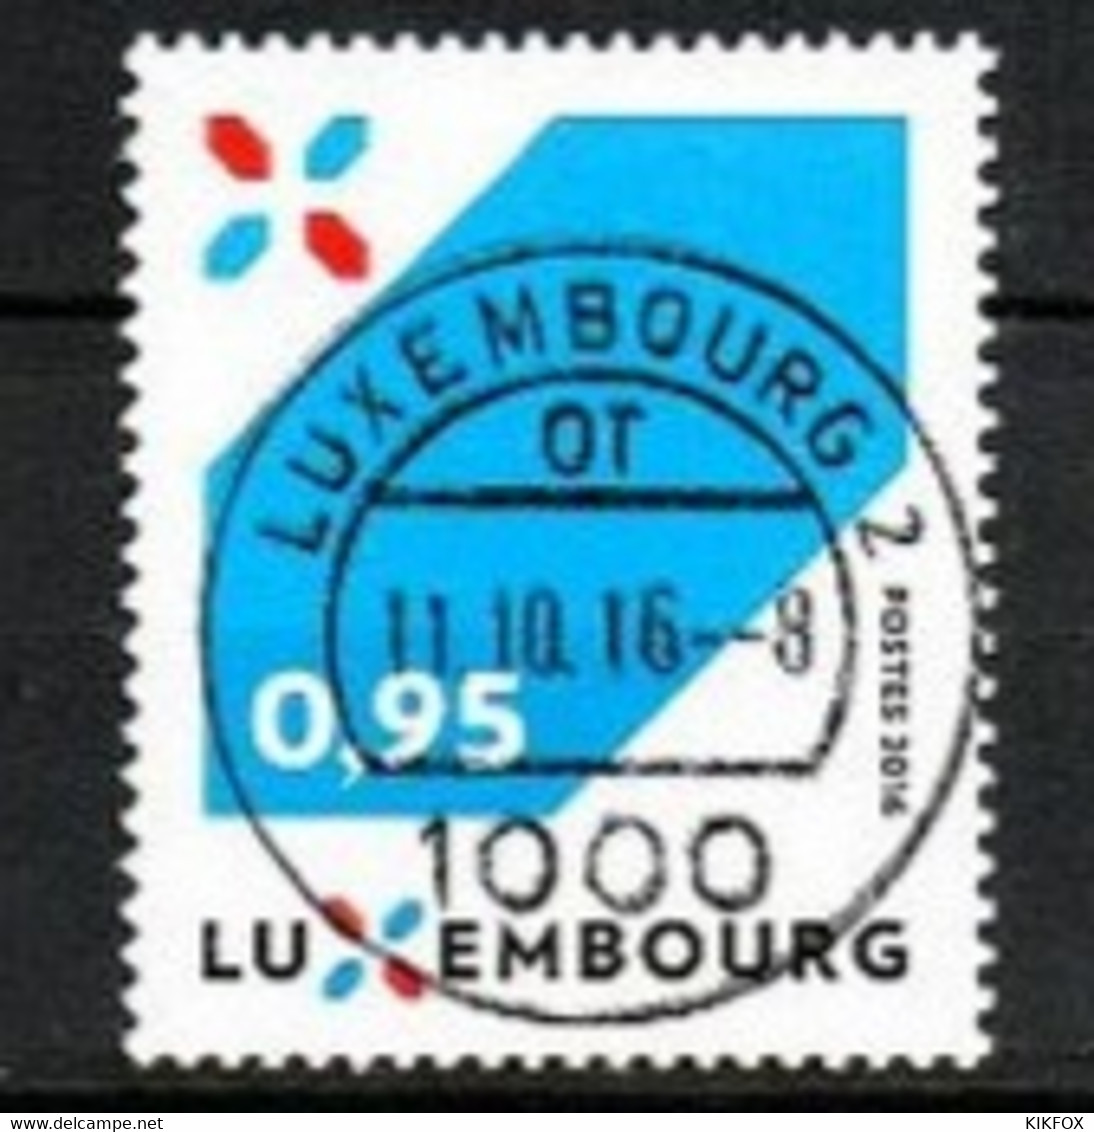 LUXEMBOURG, LUXEMBURG 2016, MI 2105, Y&T 2049, NOUVELLE SIGNATURE DU LUXEMBOURG,  GESTEMPELT, OBLITERE - Used Stamps